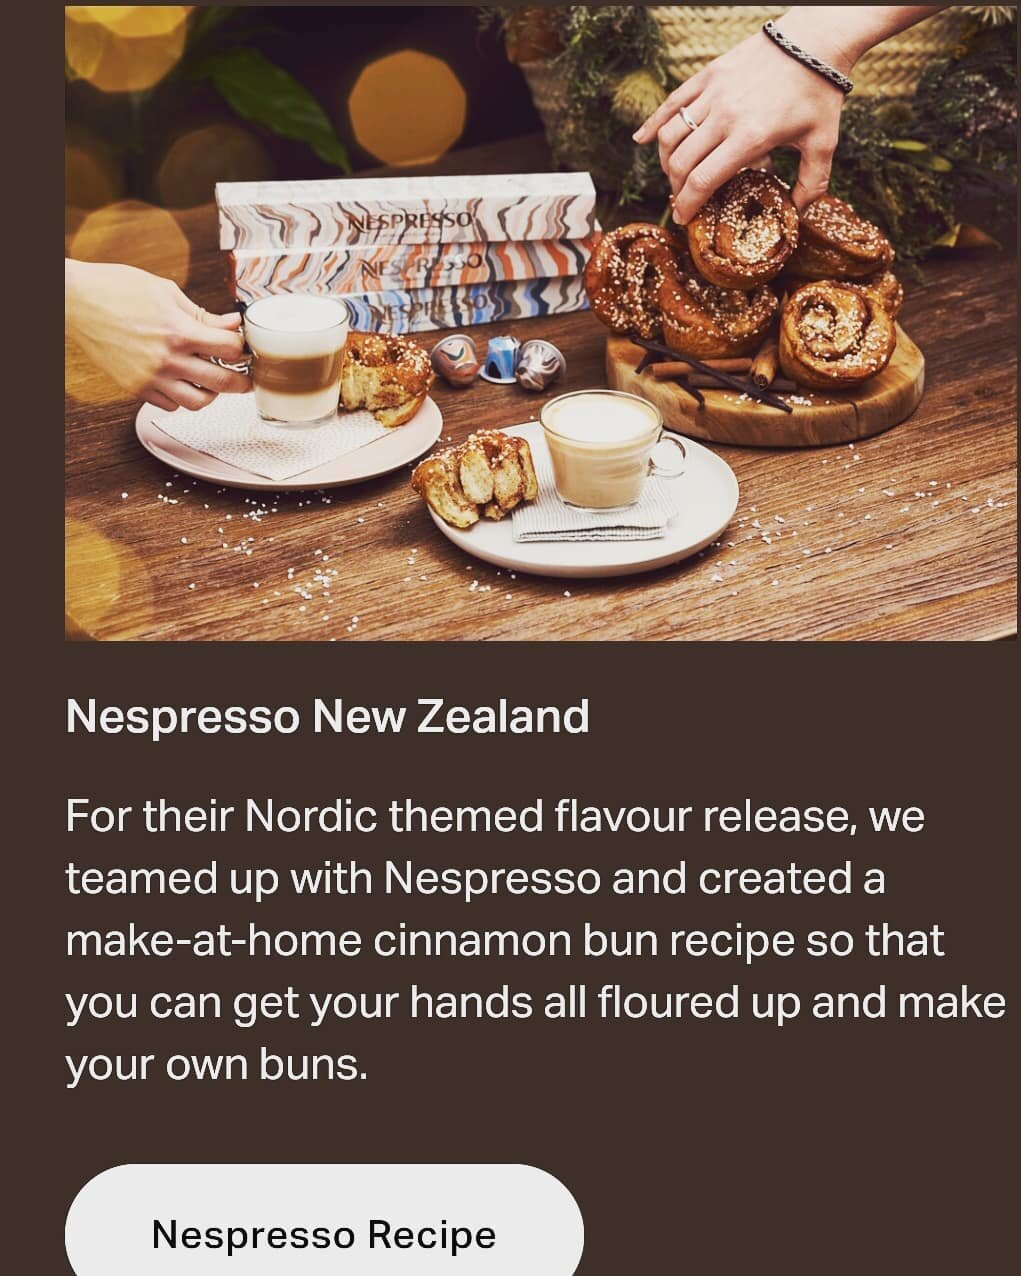 Looking for something to do with the kids this last day of school holidays (🎉🎉🎉)?
Why not click onto the [favourites] tab on our website and have a go at making your own cinnamon buns with the recipe we created for Nespresso?
.
.
.
And if you stru